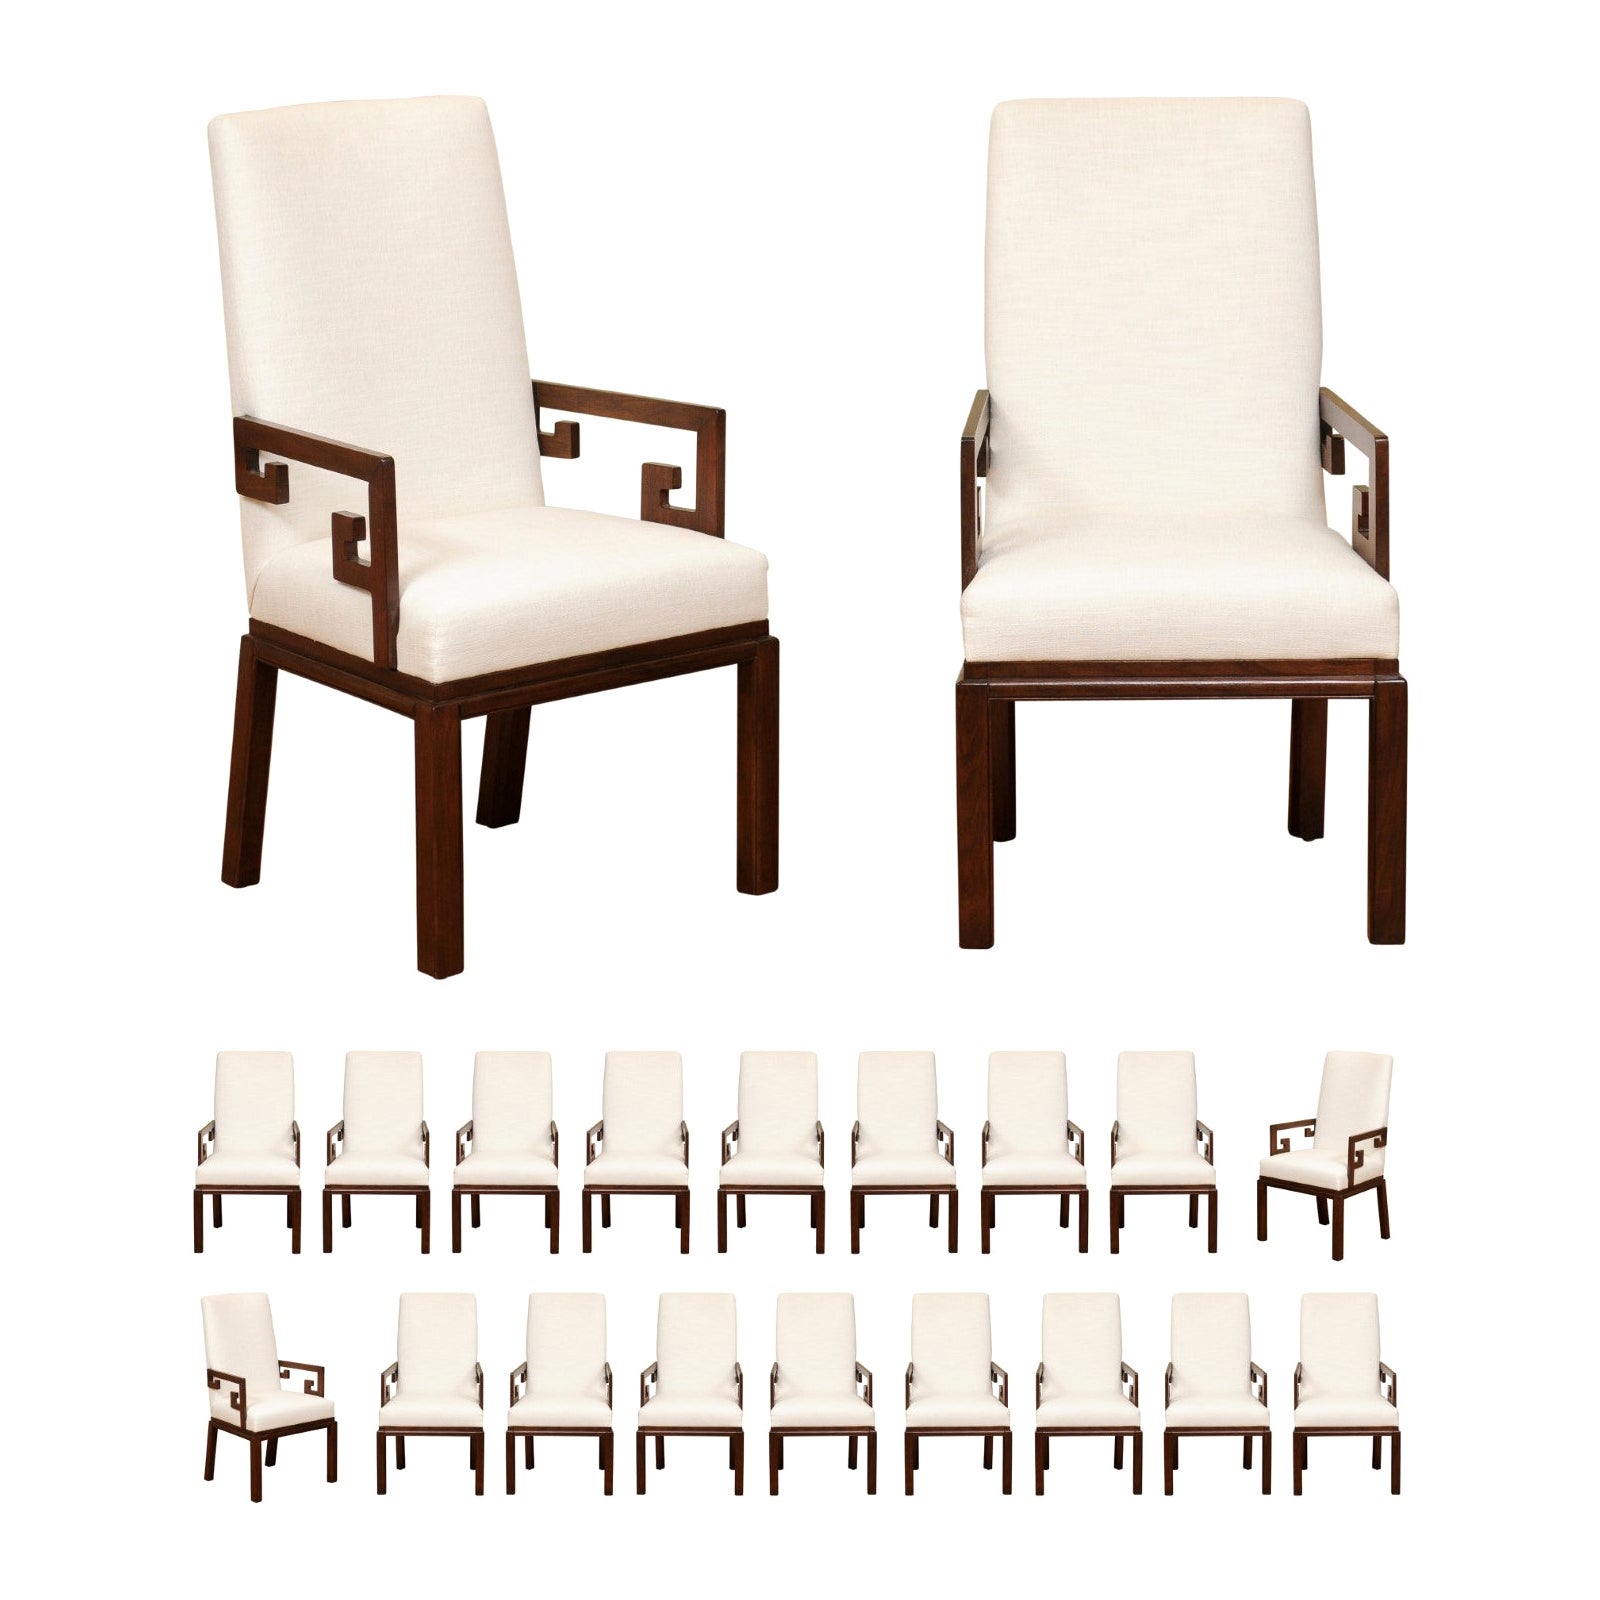 All Arms, Sublime Set of 20 Greek Key Chairs by Michael Taylor, circa 1970